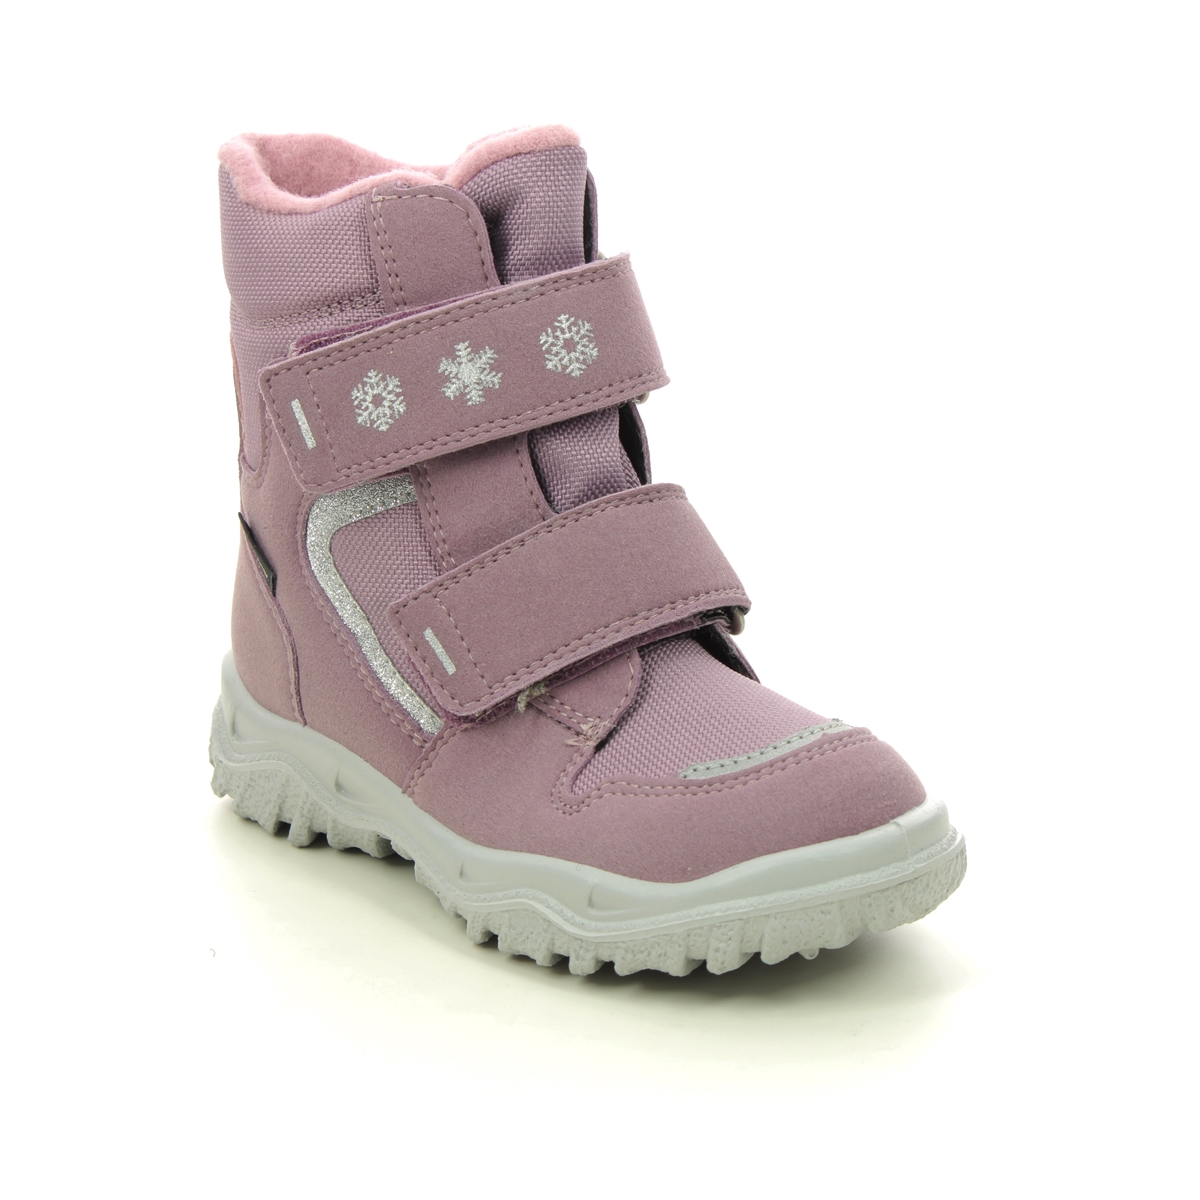 Superfit Husky  Inf Gtx Pink Leather Kids Toddler Girls Boots 1000045-8510 In Size 26 In Plain Pink Leather For kids